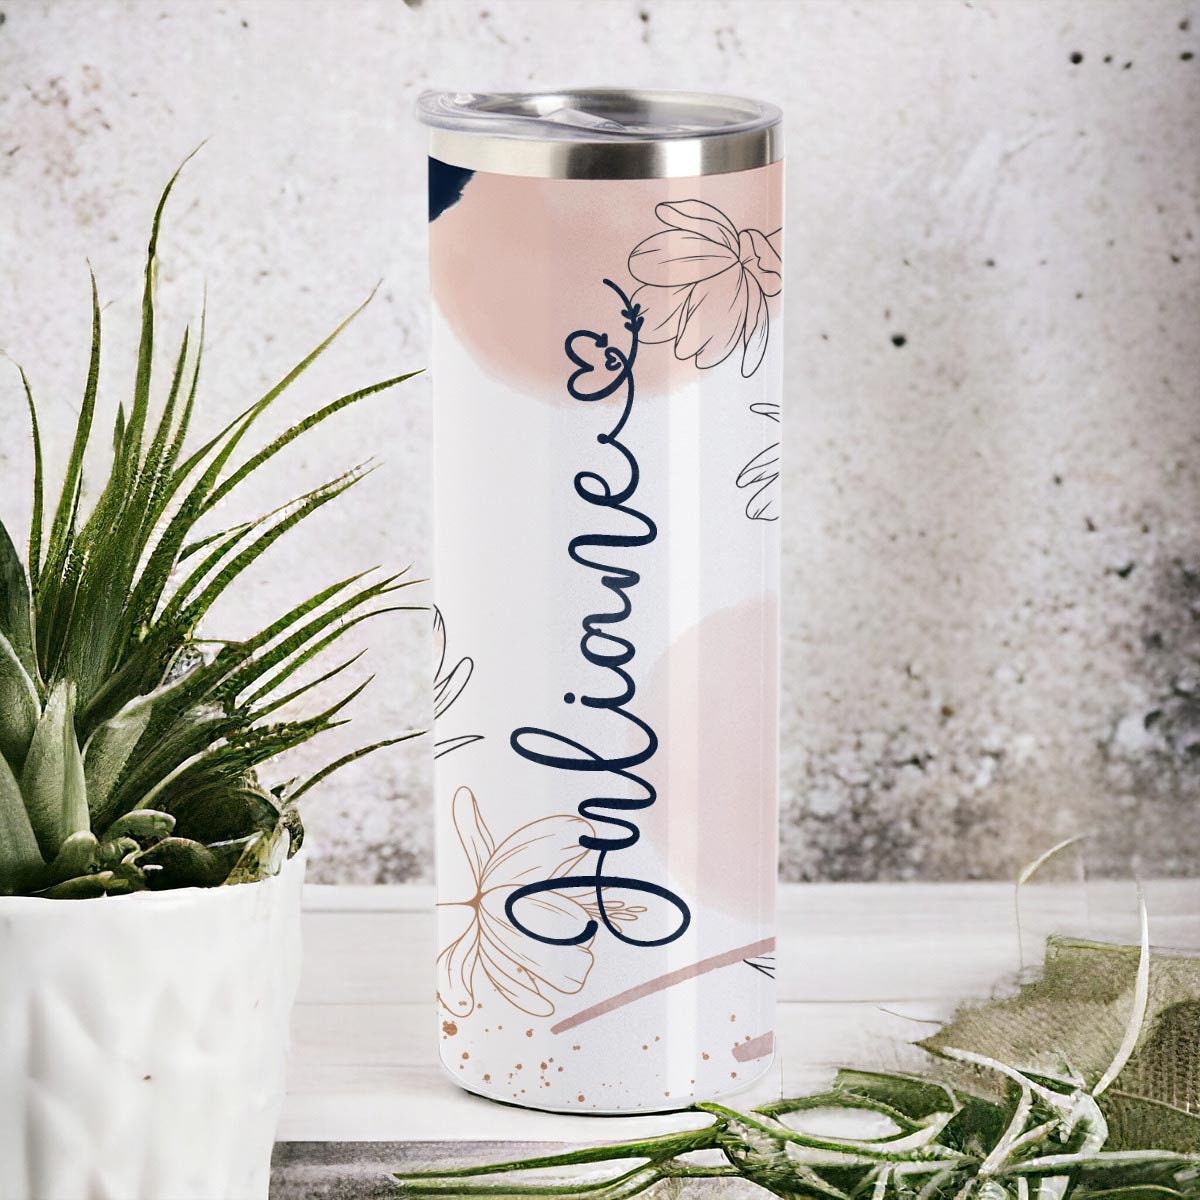 individueller Tumbler, Thermoflasche personalisiert mit Name